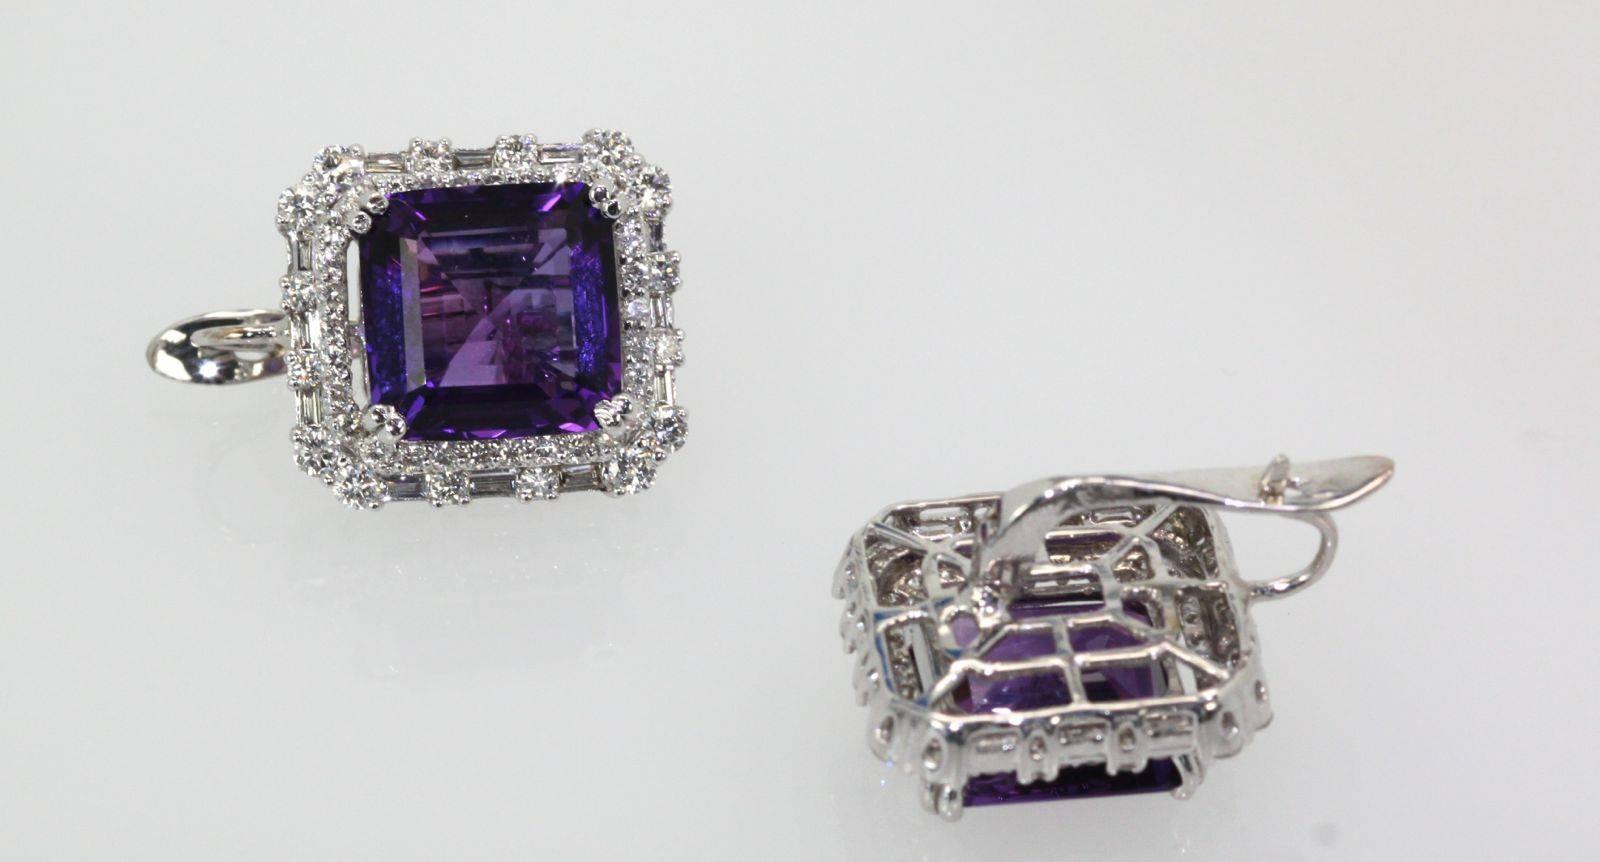 These earrings are made from 2 emerald cut Amethyst Stones approximately 4 carats each to total 8 carats with a Diamond Surround.
There are about 2 carats of very white G color Diamonds both round and baguette that surround these gorgeous amethysts.